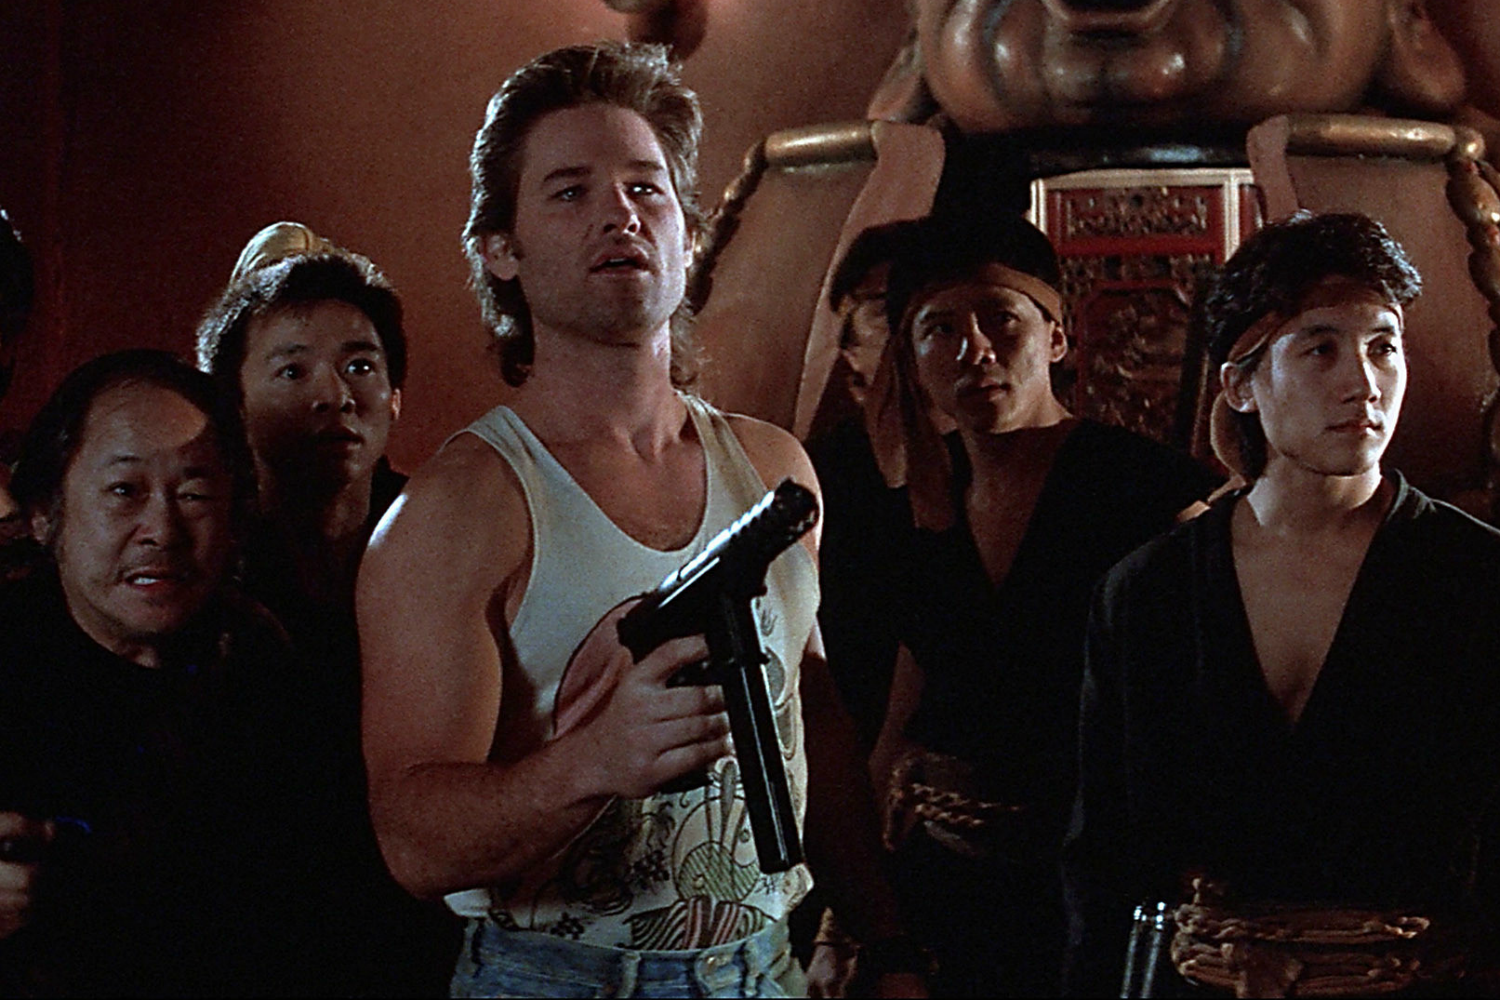 Big Trouble in Little Endor? Kurt Russell could’ve been Han Solo in Star Wars